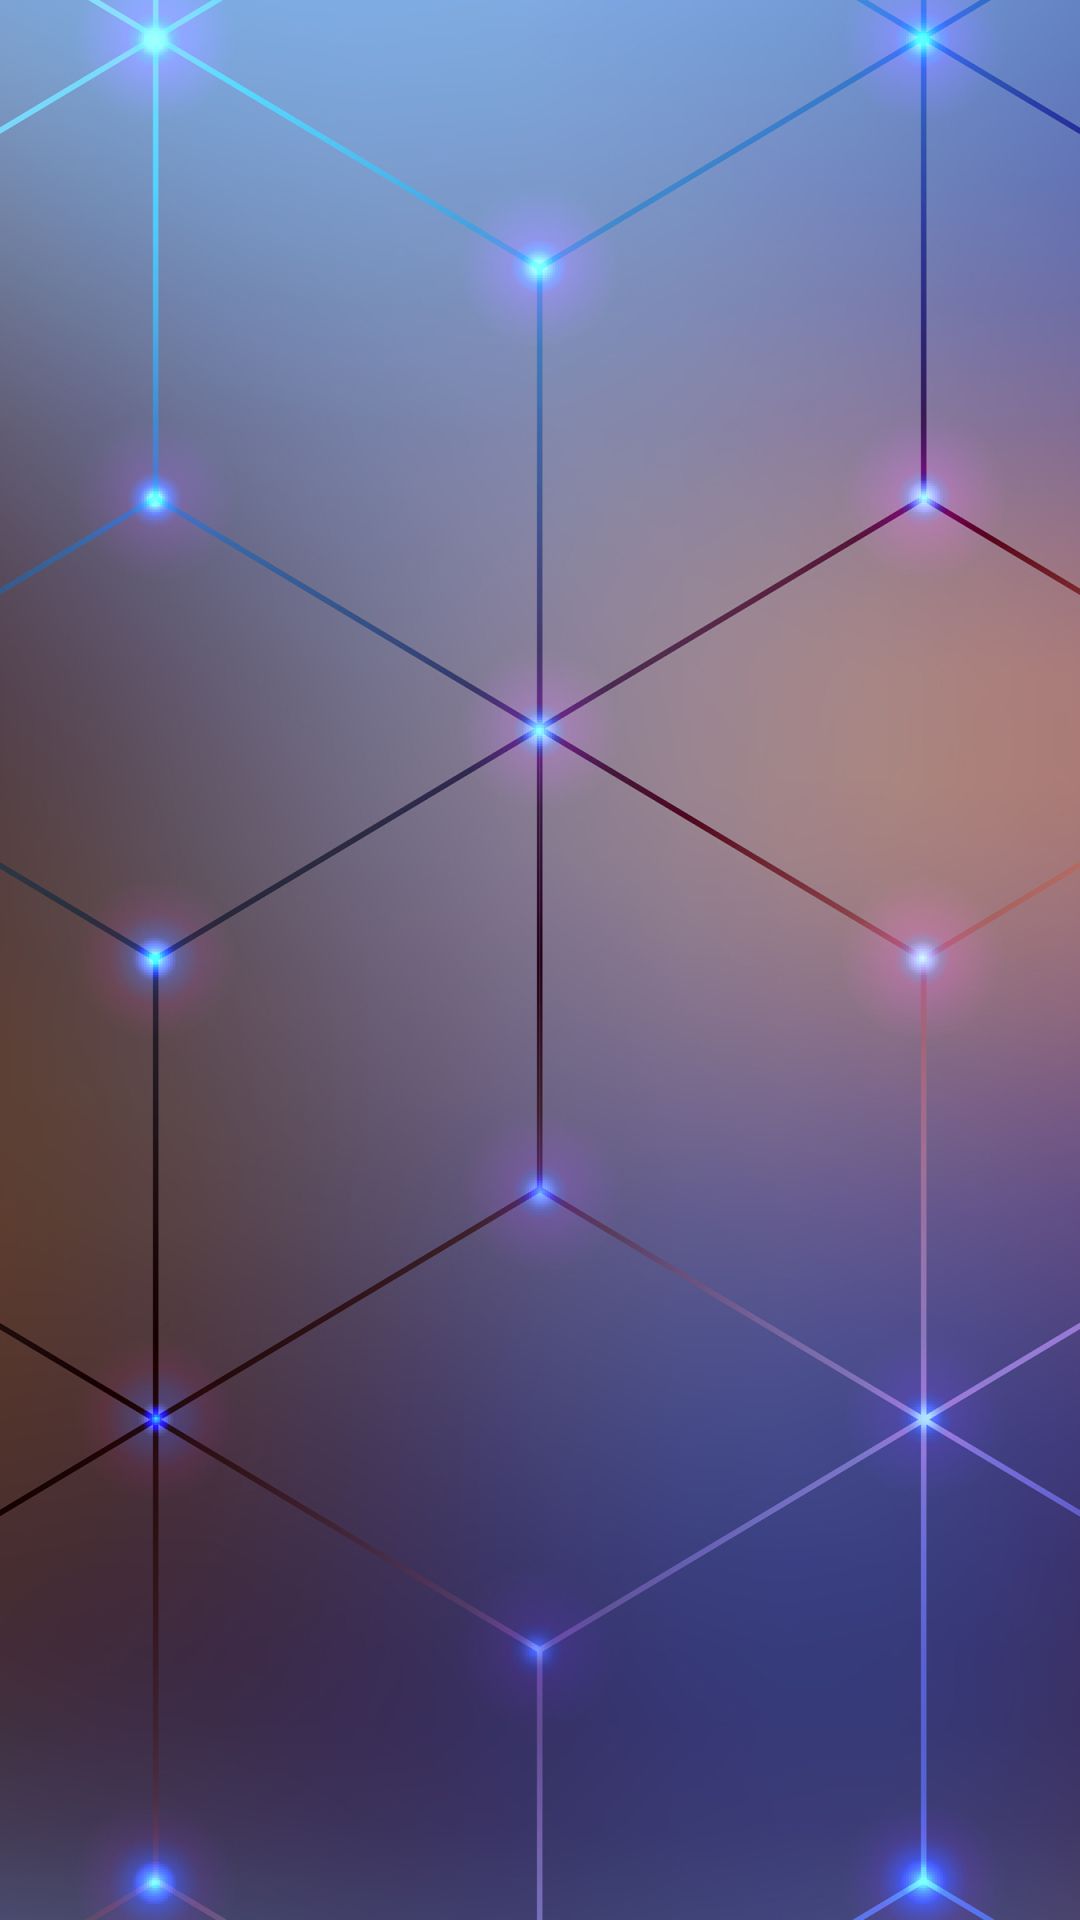 Download This Wallpaper IPhone 6 Geometry 1080x1920